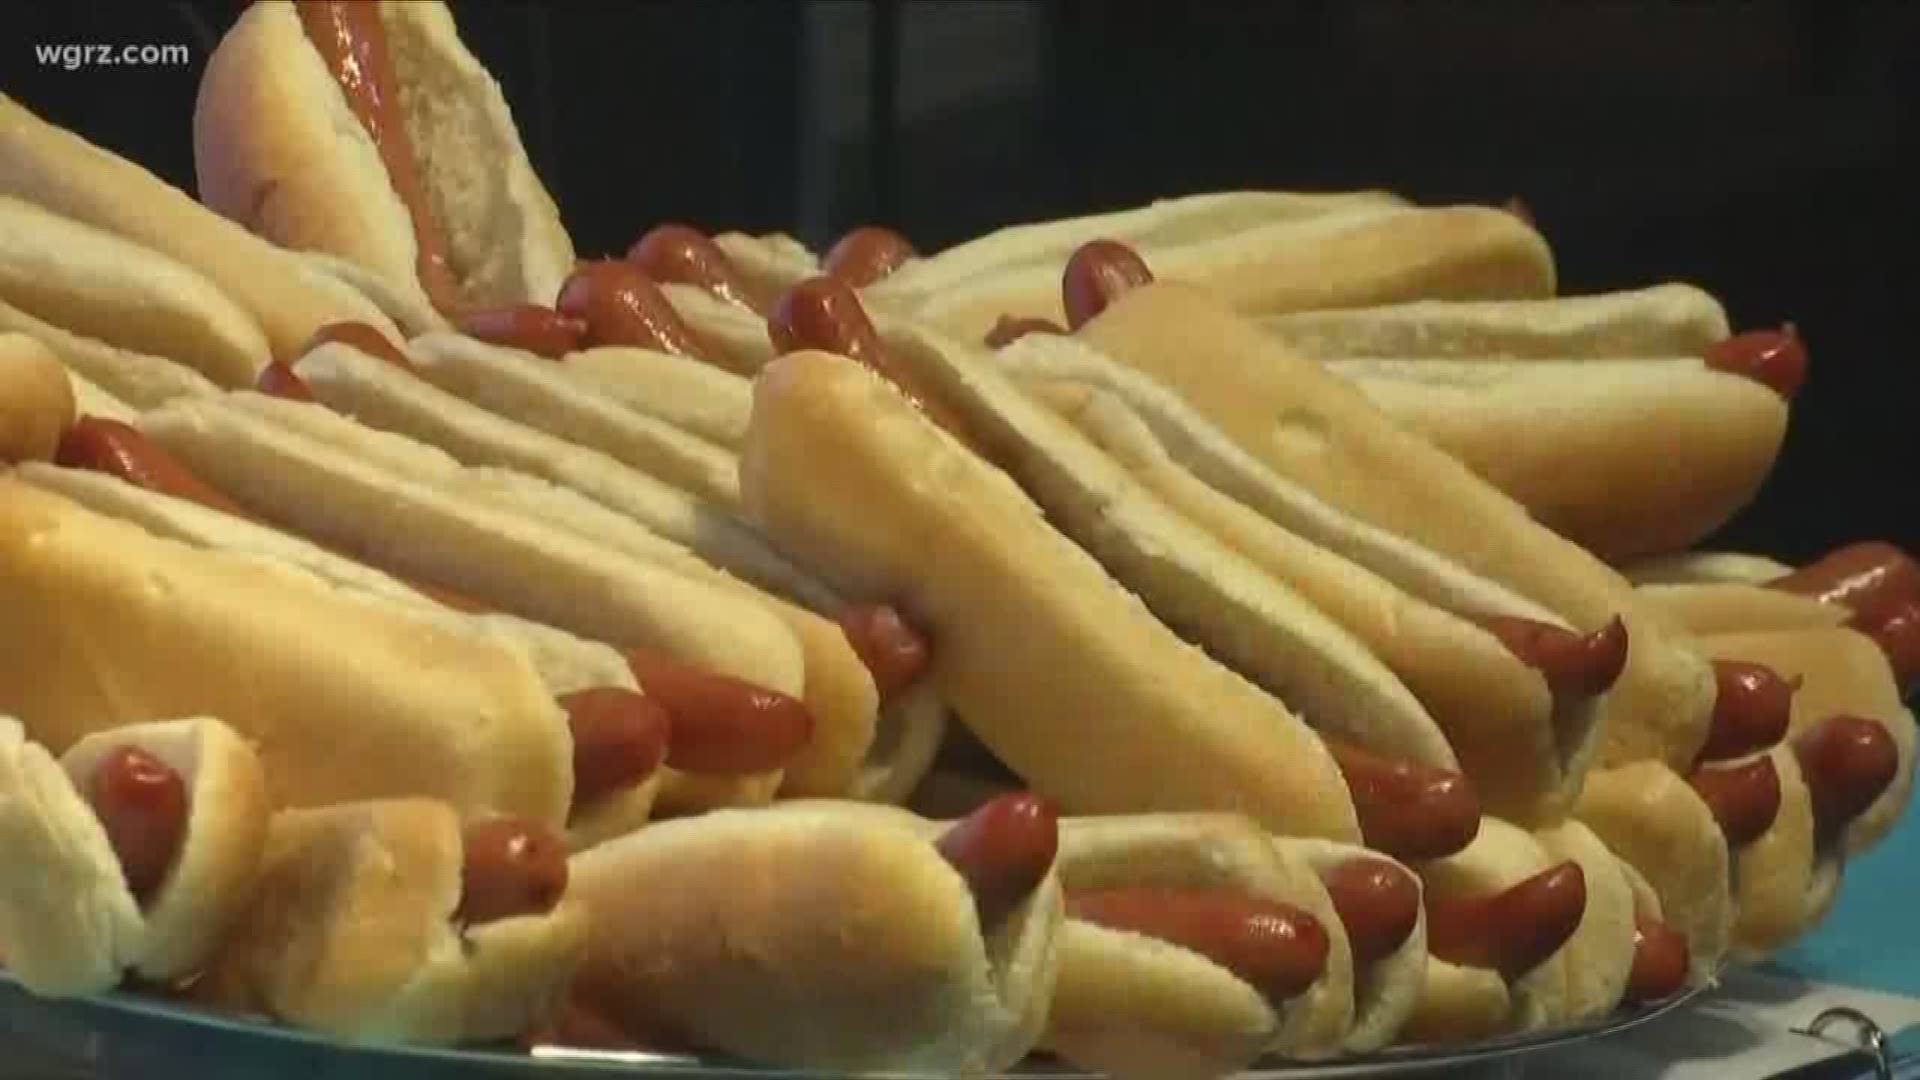 WNY man to compete in hot dog contest